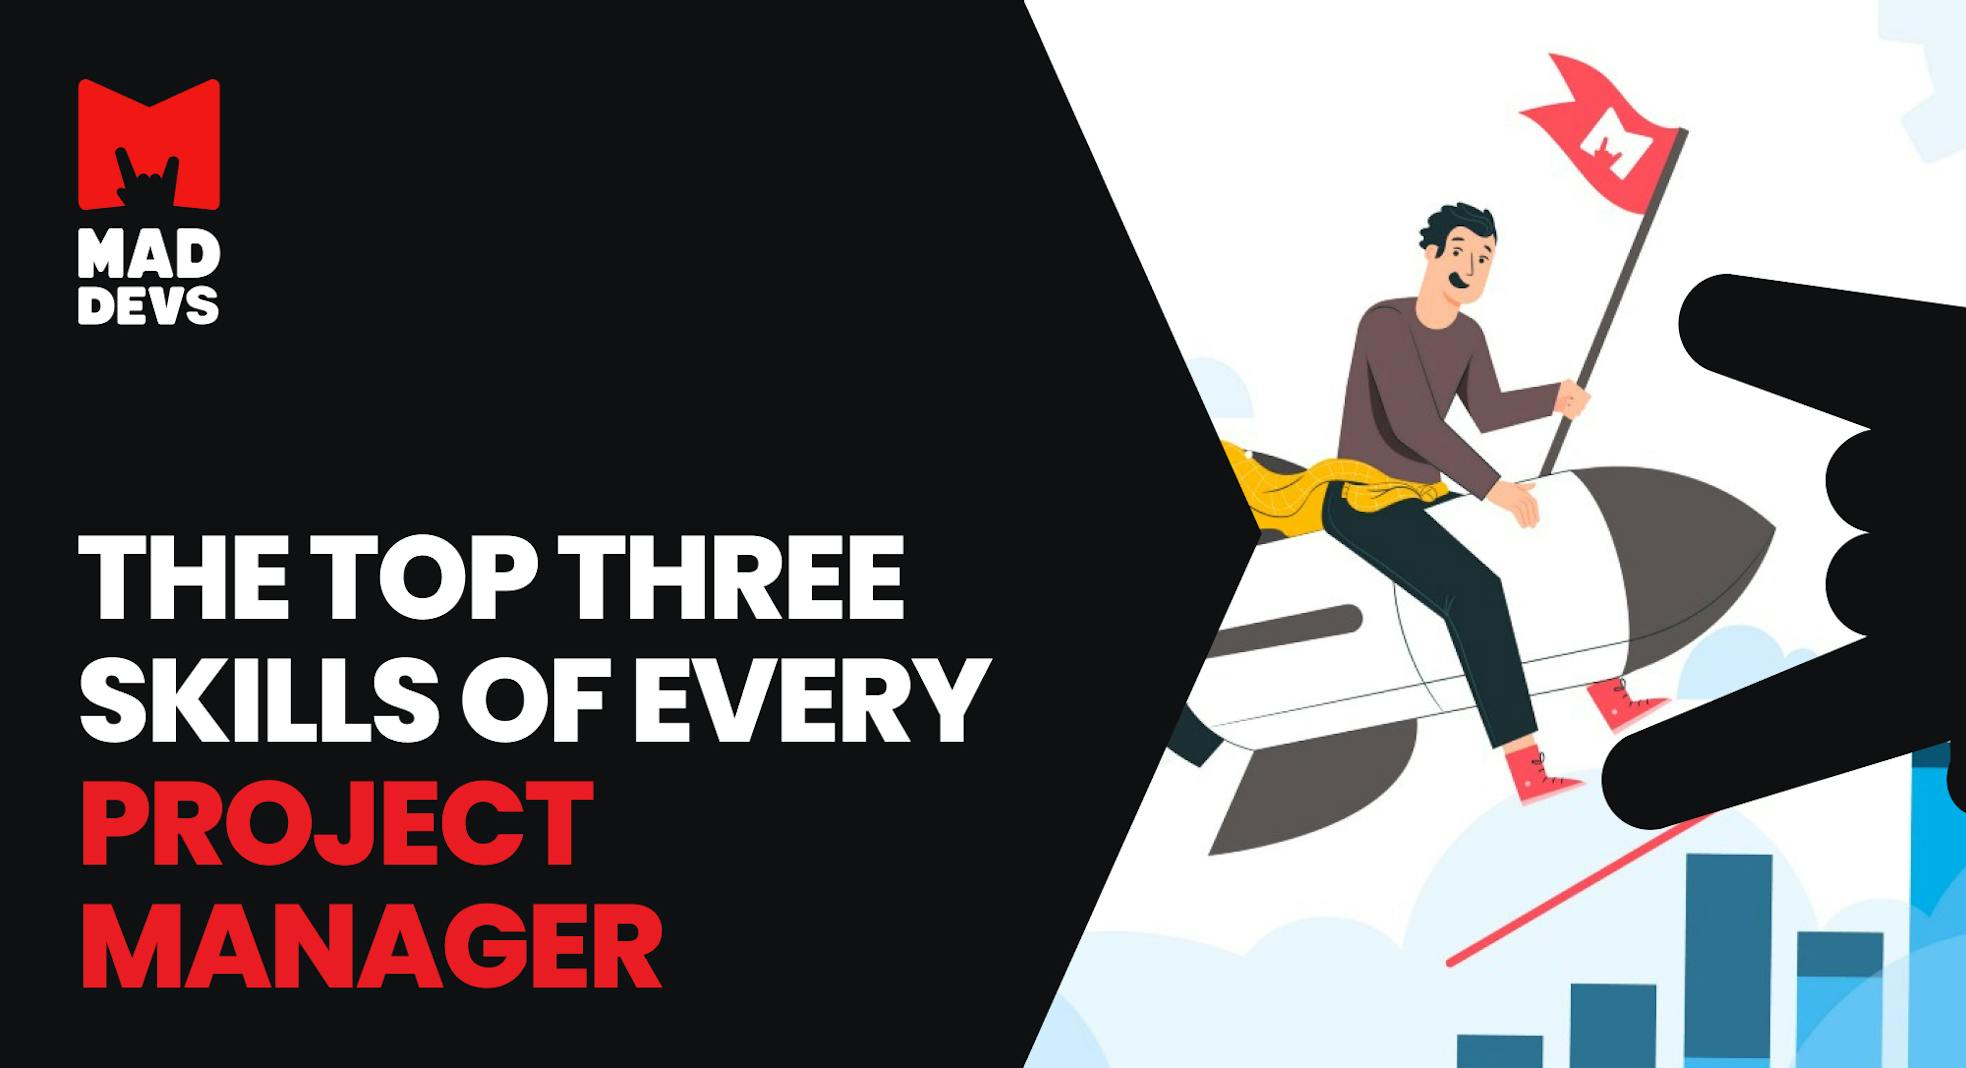 The Top Three Skills a Project Manager Should Focus On